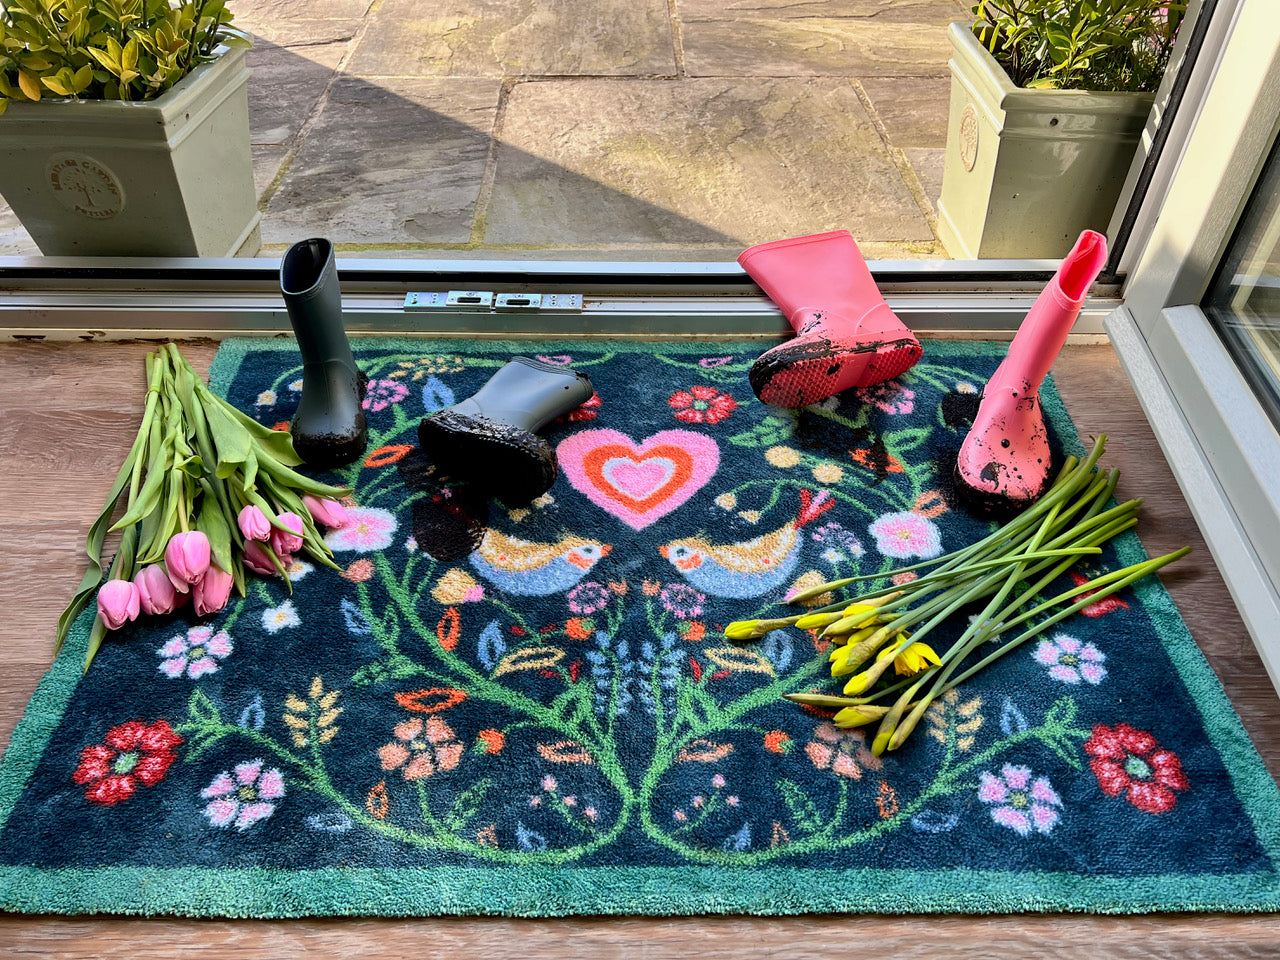 A floral door mat with flowers and wellies on top of it